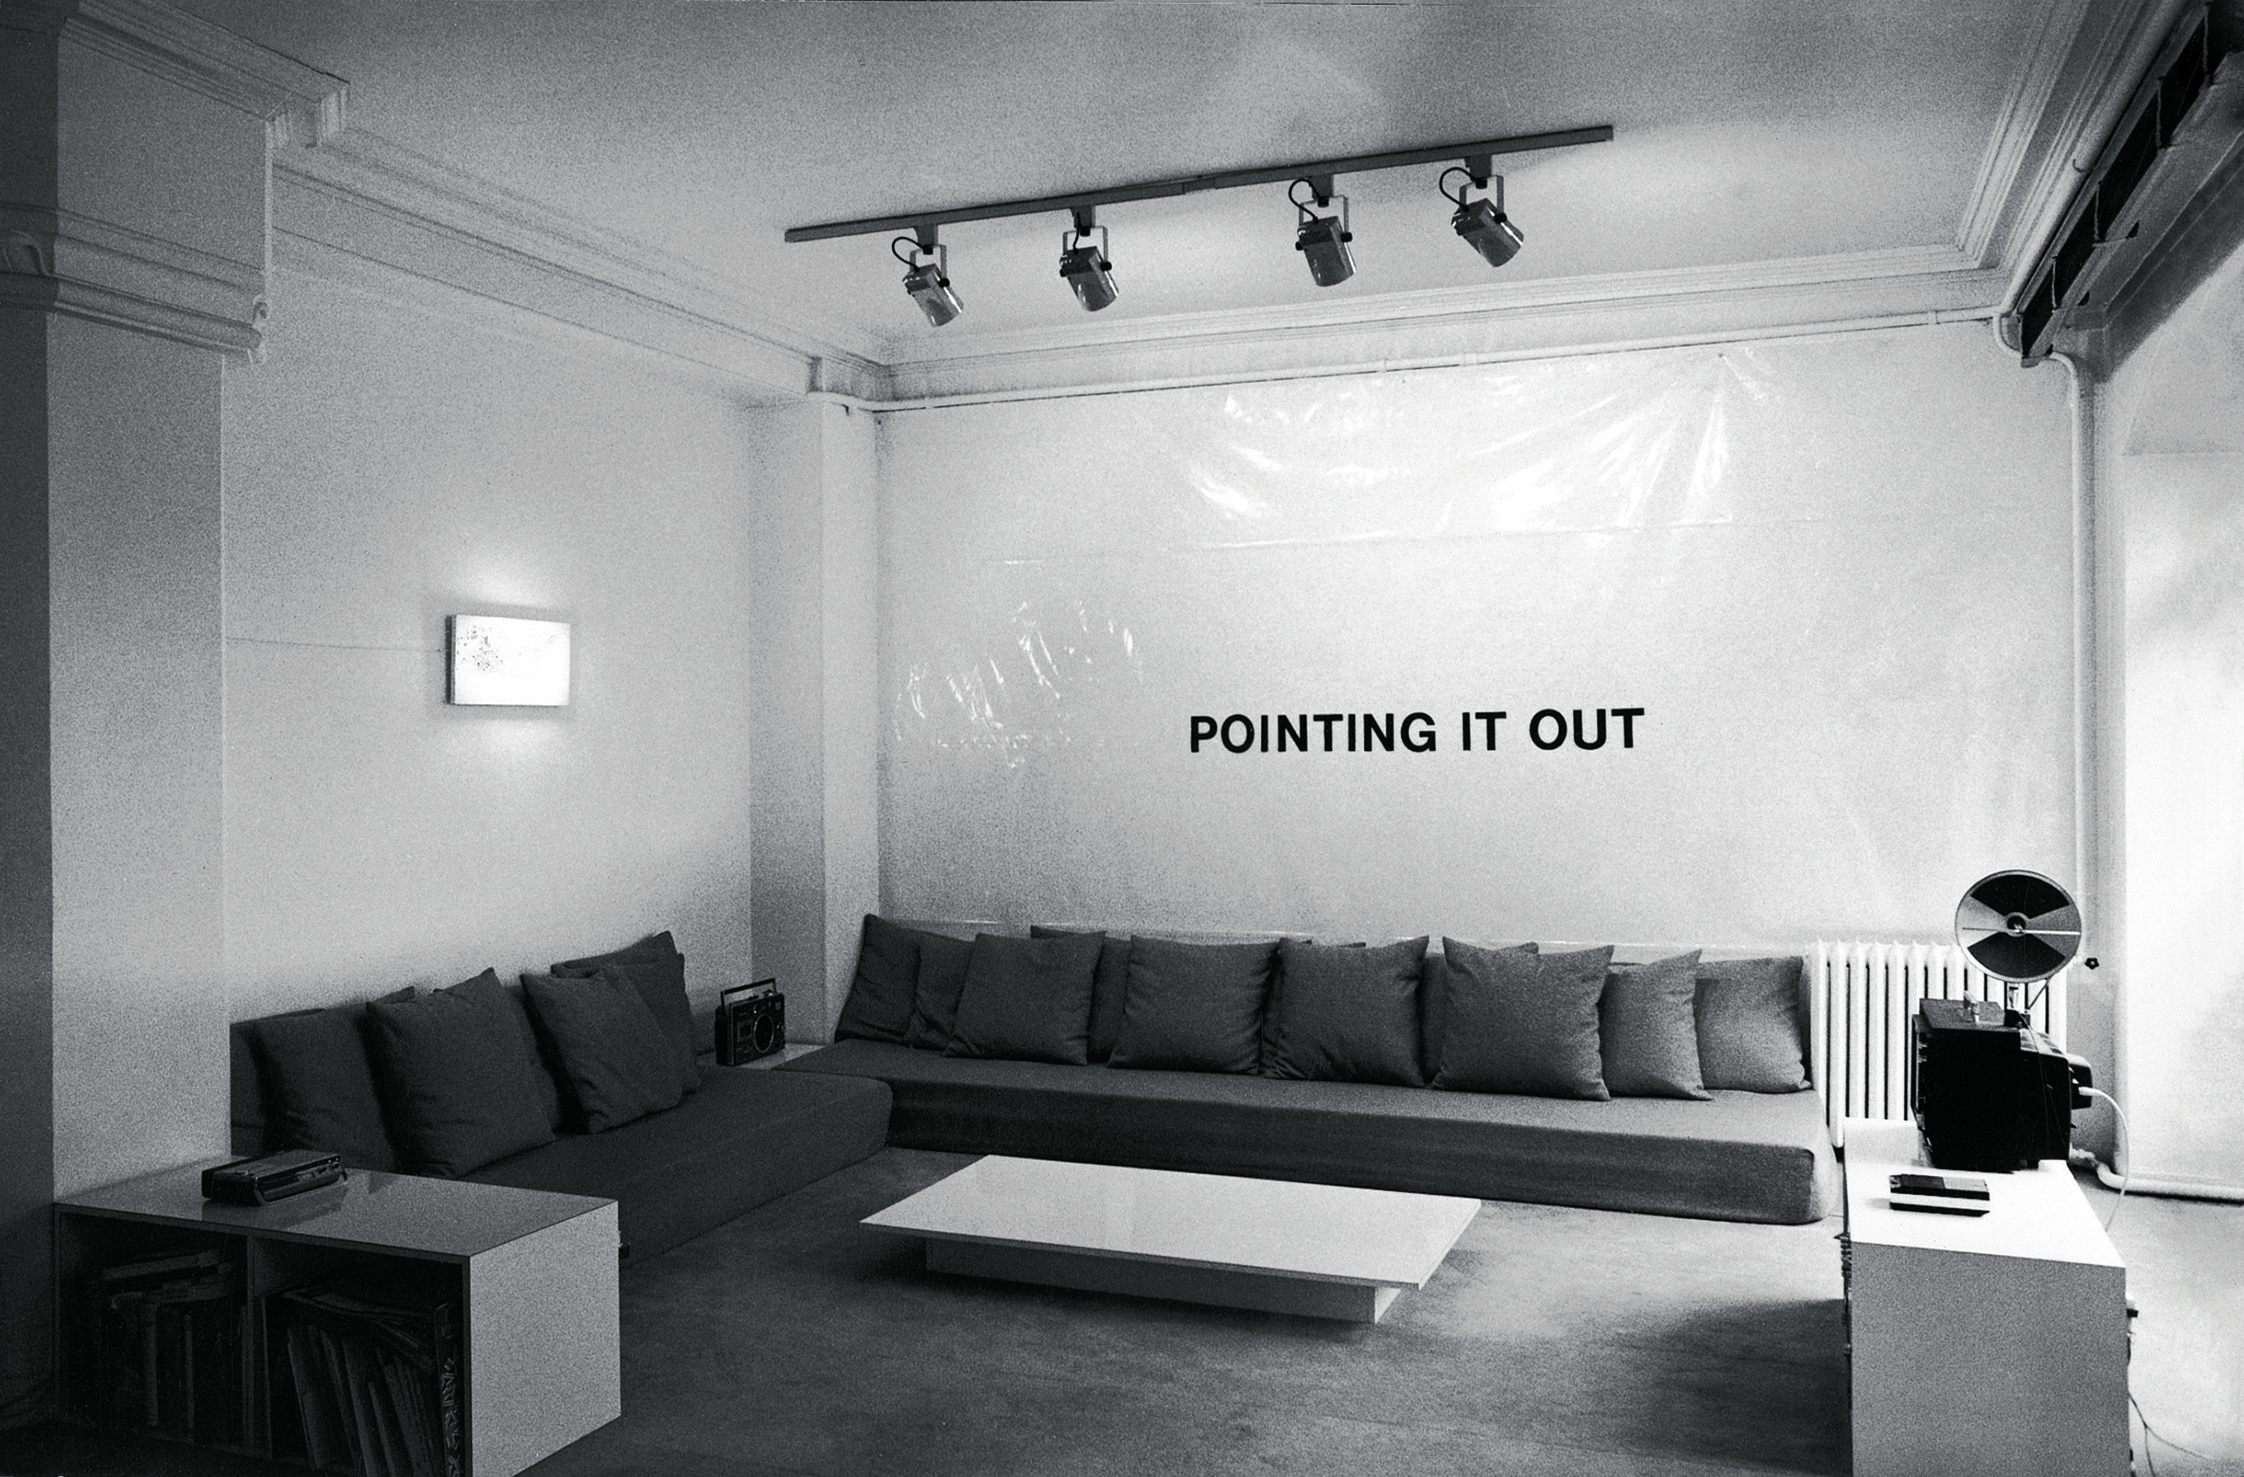 POINT IT OUT (1976-1977) ADHESIVE VINYL LETTERS, SITE SPECIFIC